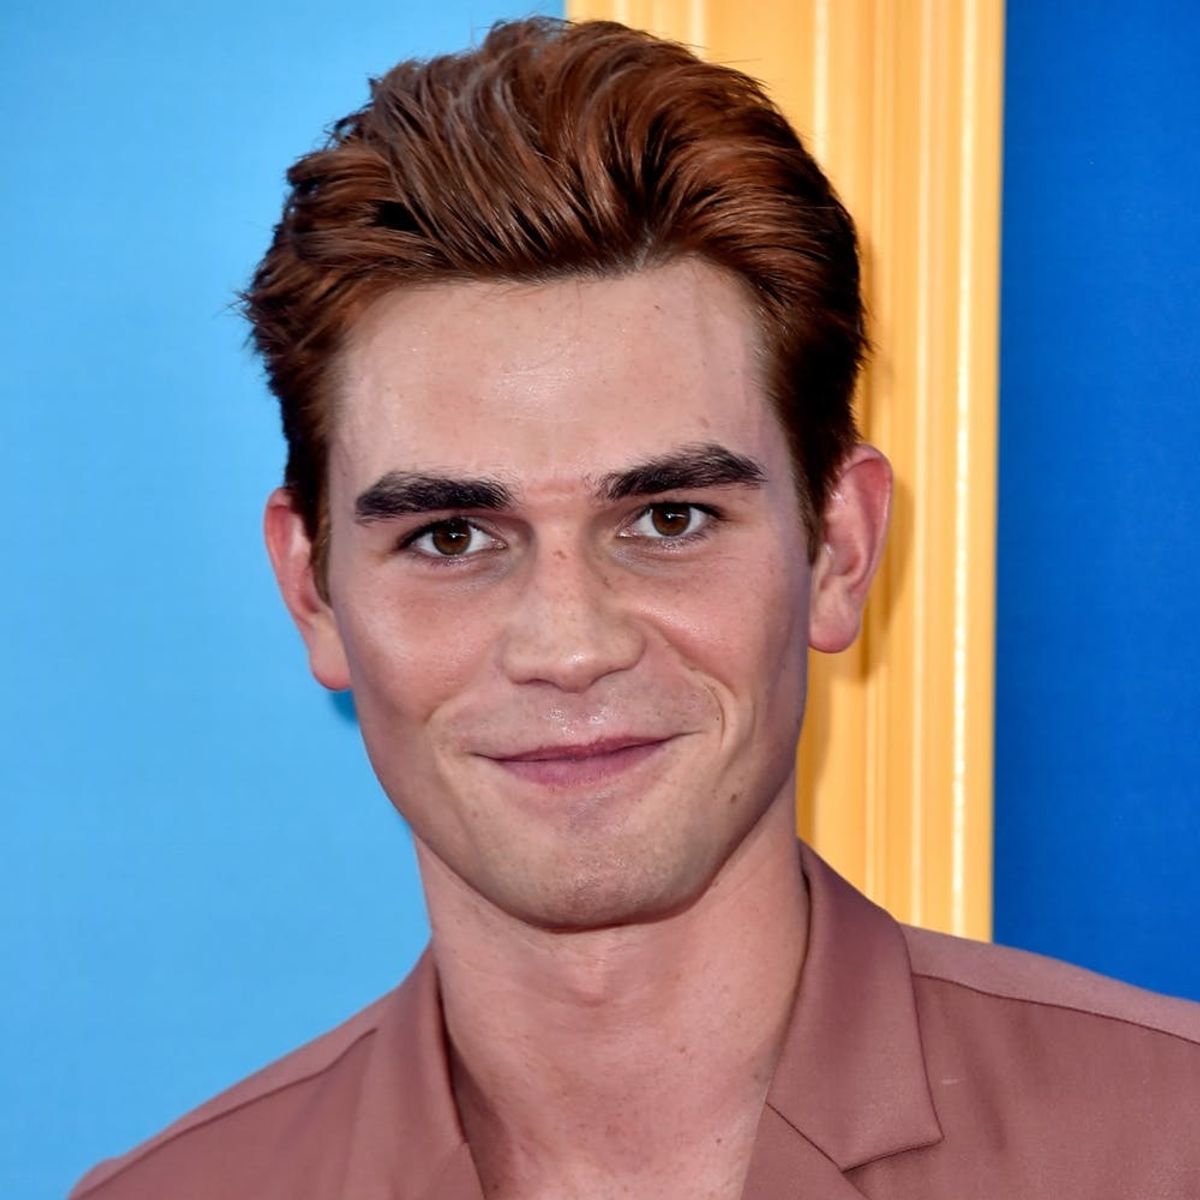 KJ Apa Hilariously Photobombed ‘Riverdale’ Costars Lili Reinhart and Cole Sprouse at the Teen Choice Awards